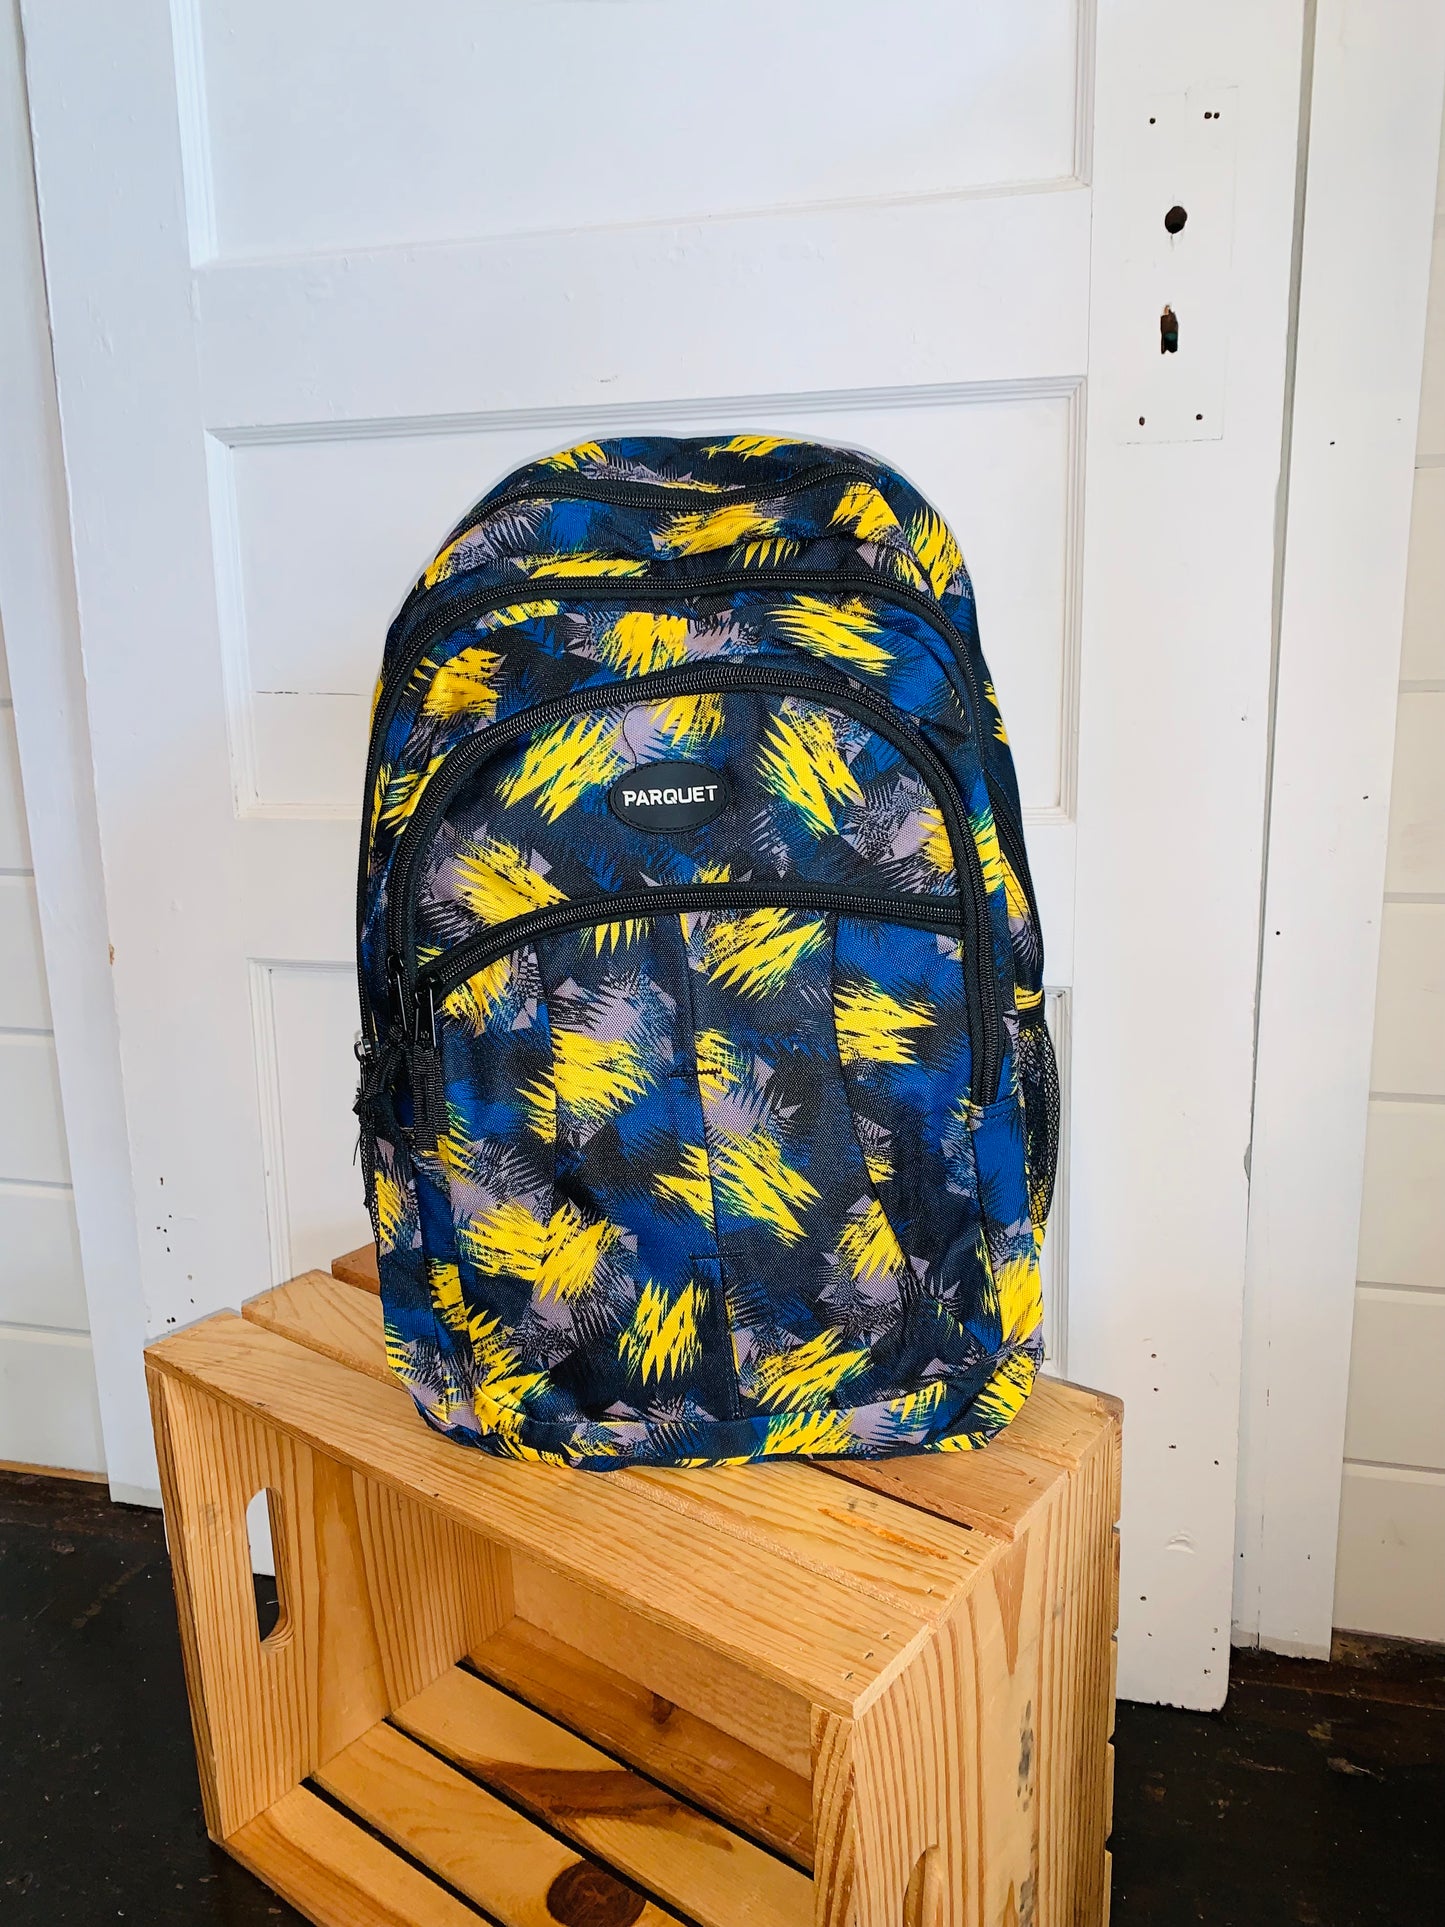 Parquet Boys Backpack